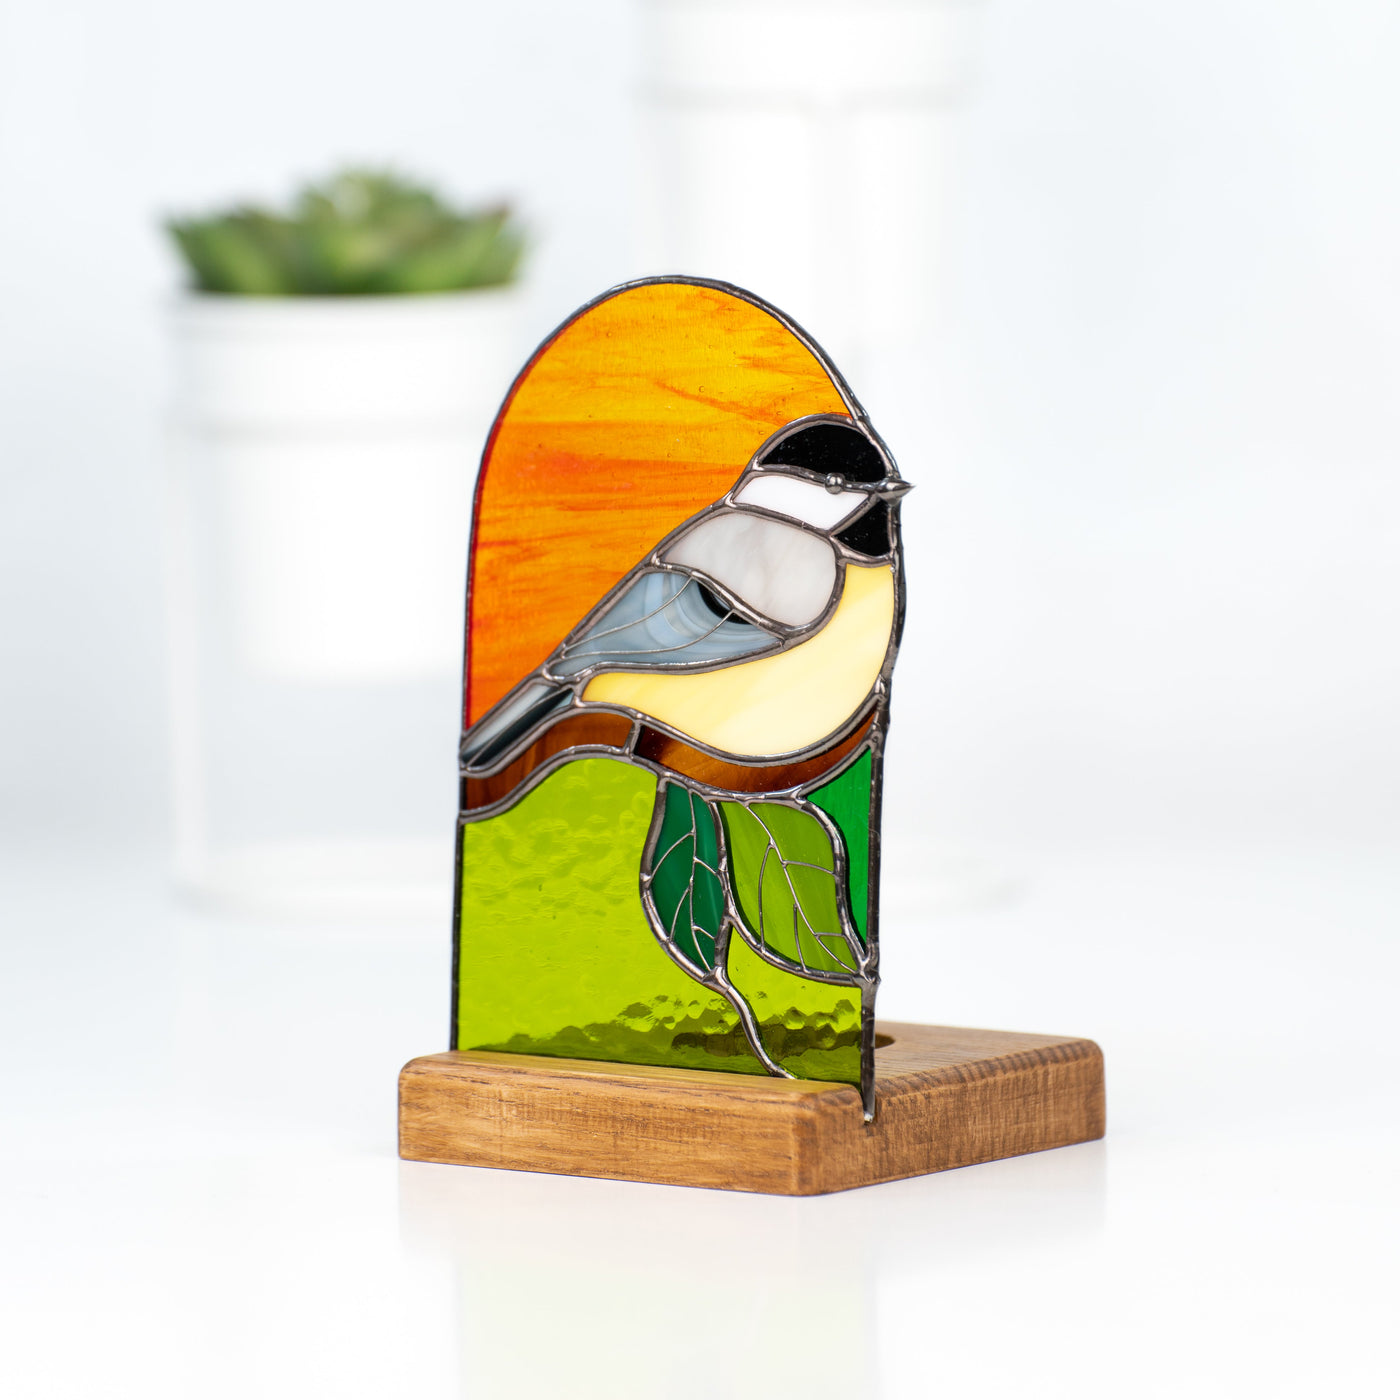 Stained glass panel depicting a chickadee on orange and green background side-view